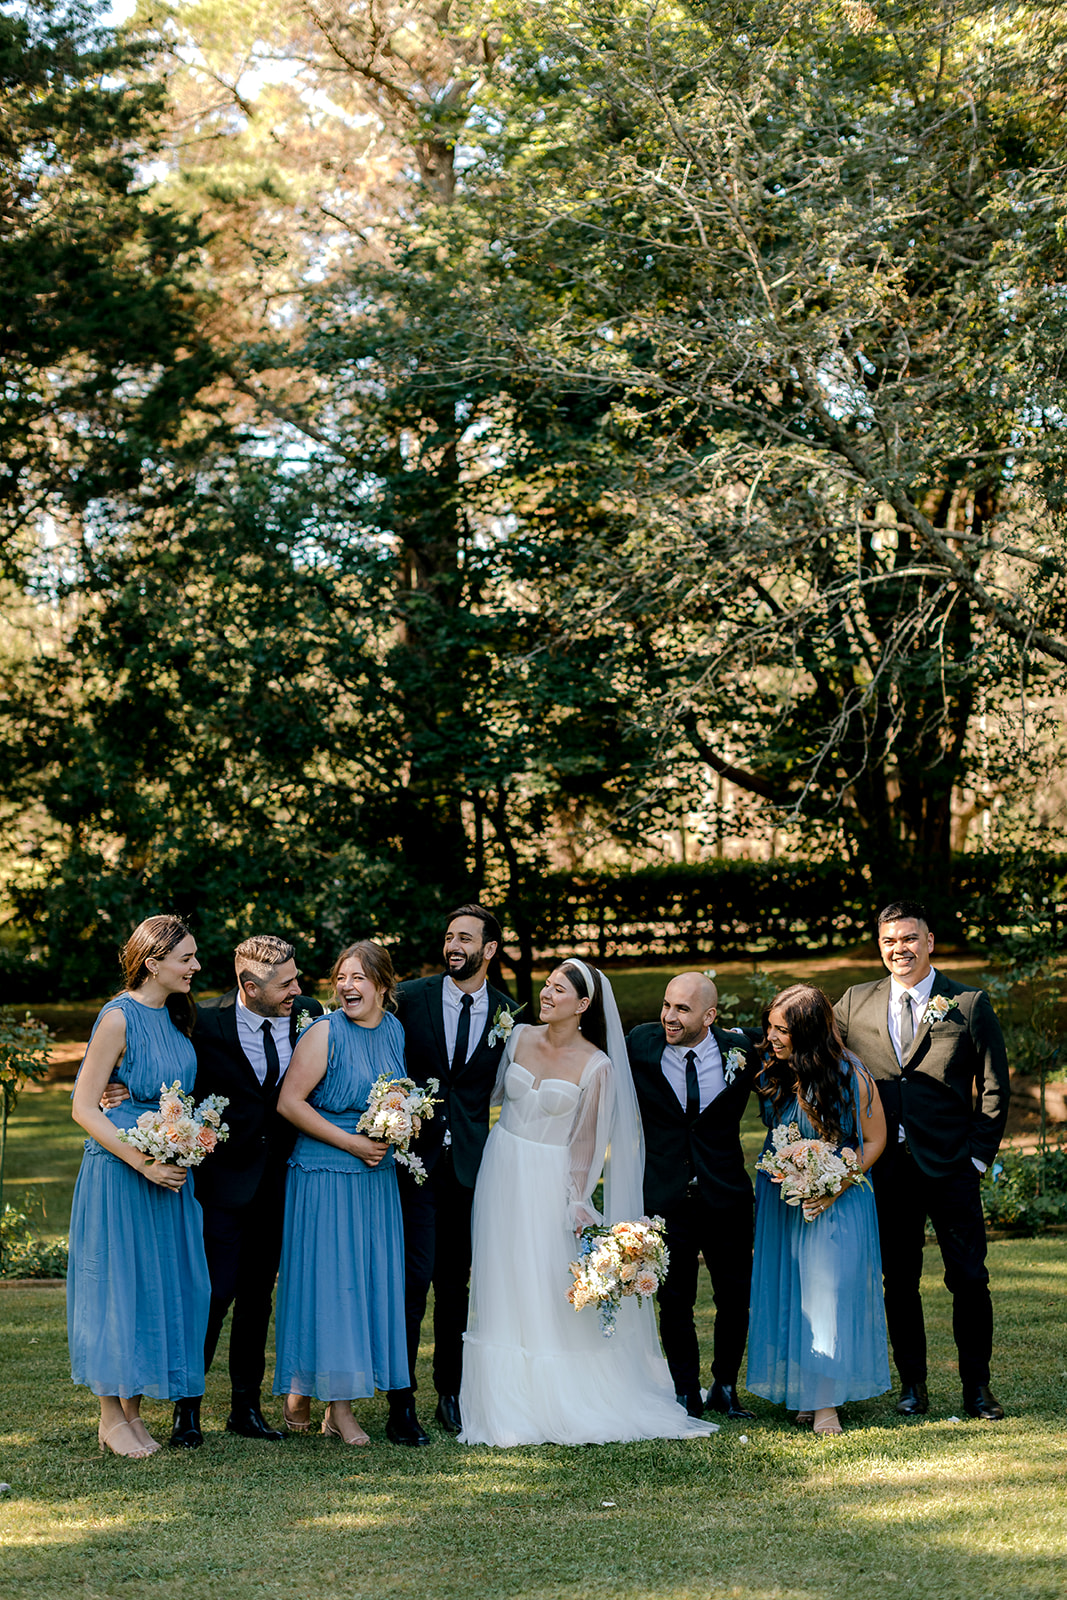 Bride & groom with their bridal party at their elegant country wedding.